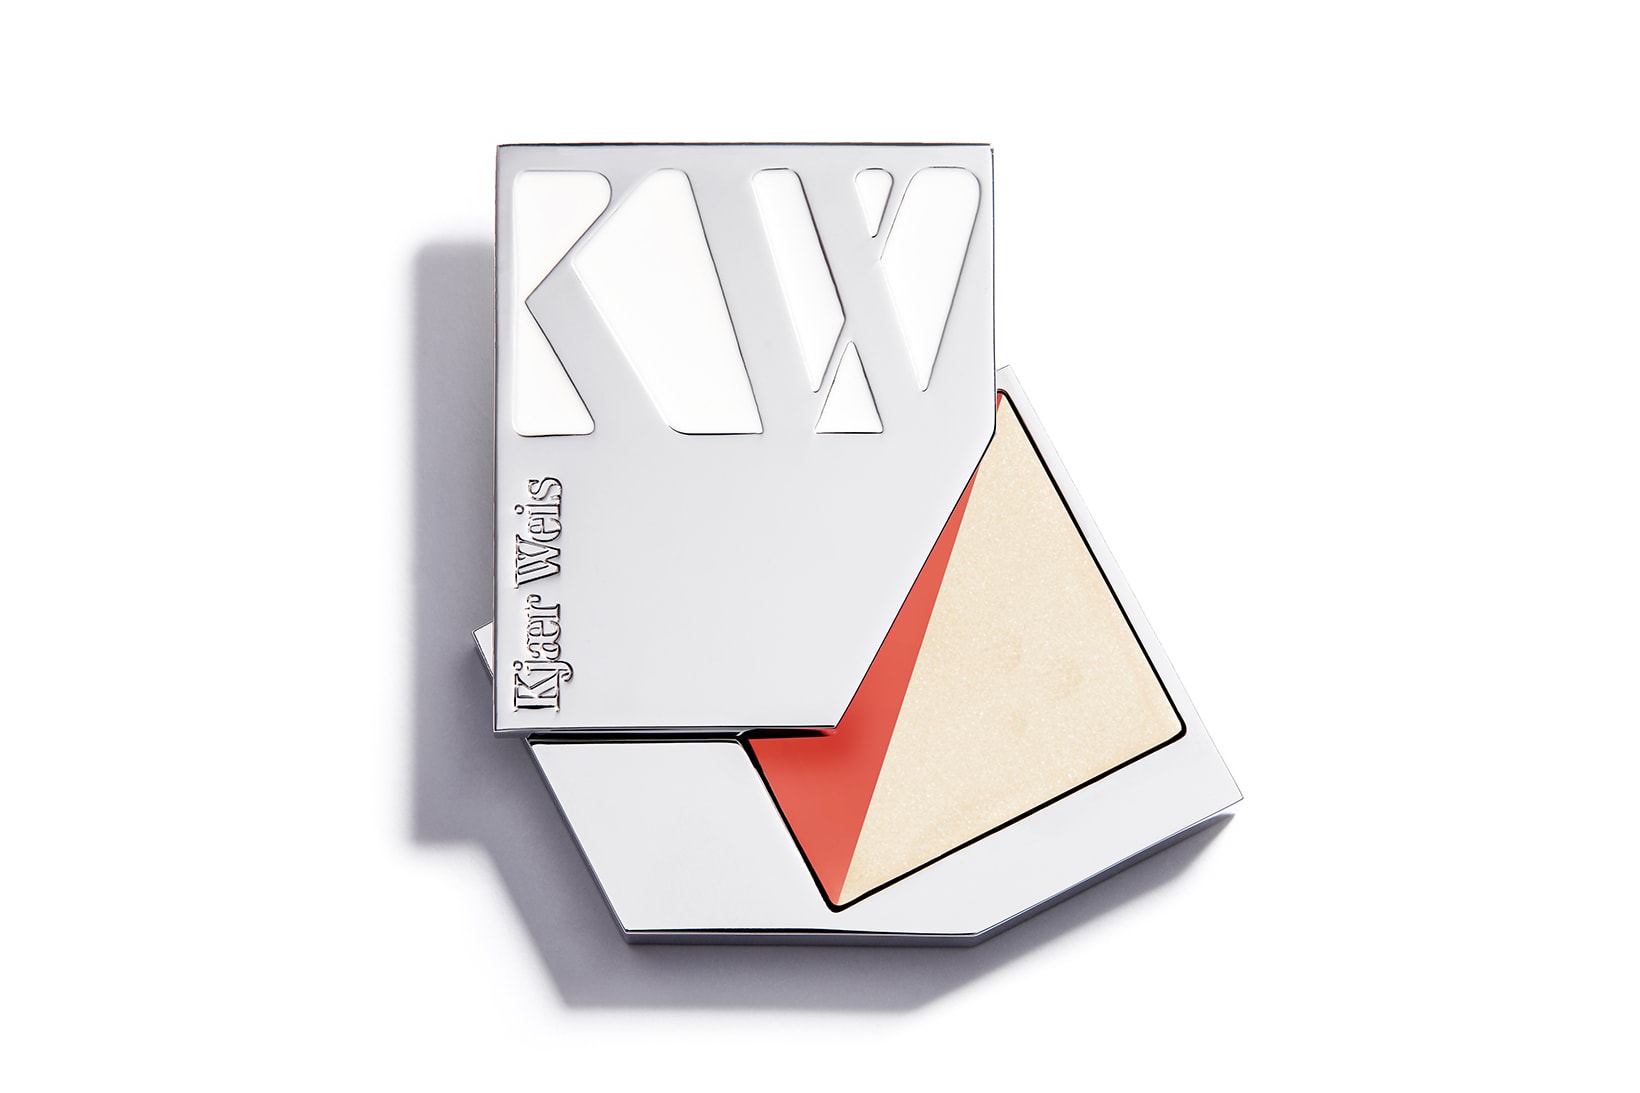 kjaer weis nude naturally collection lipsticks clean beauty makeup organic cosmetics sustainable